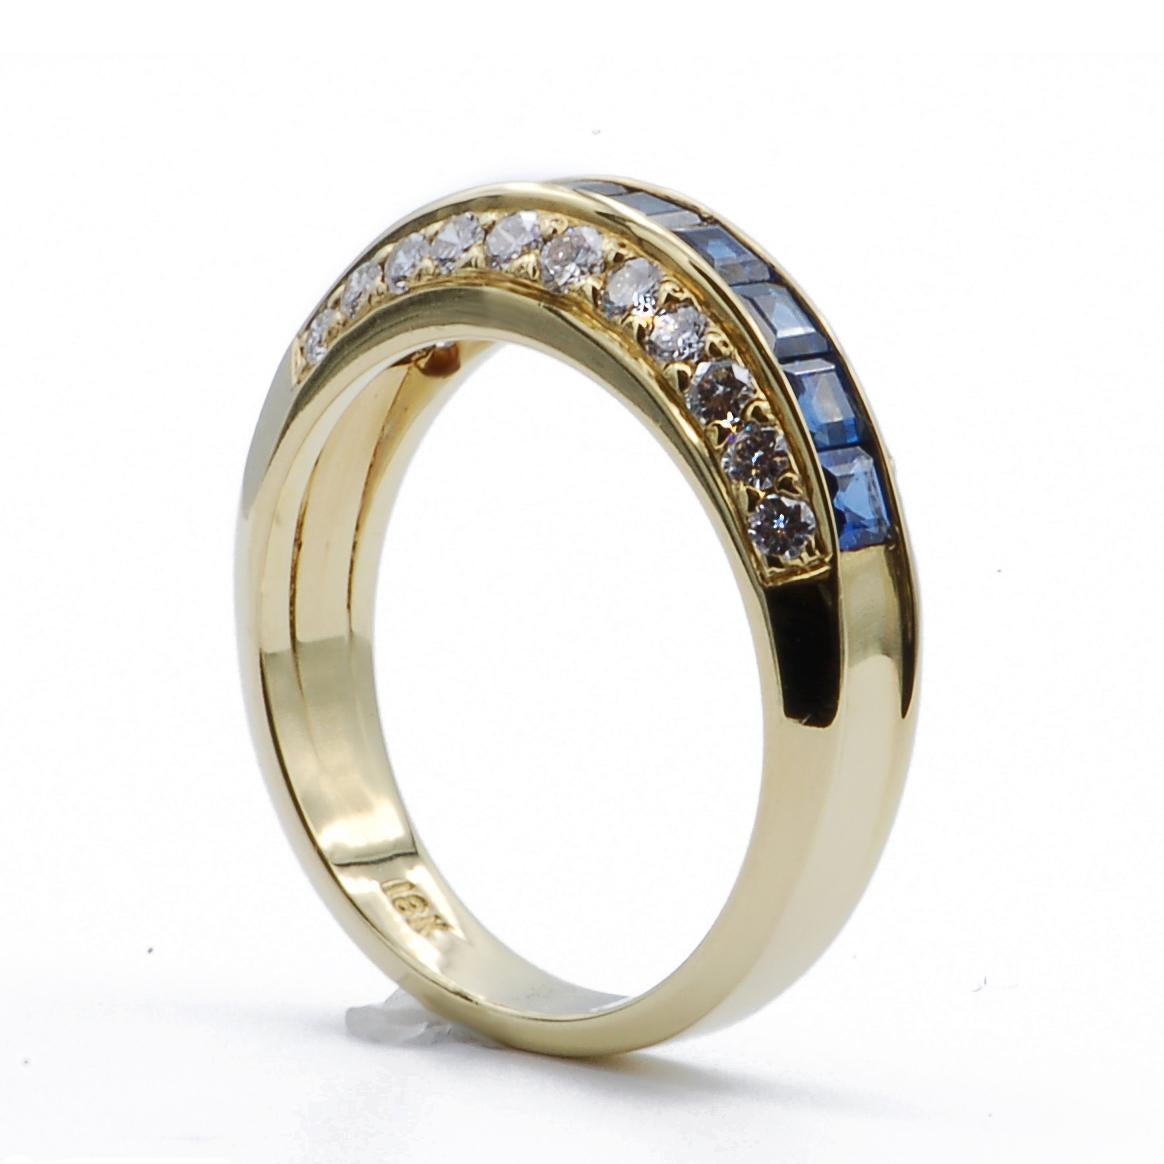 Elegant 18k yellow gold ring features three rows of stones along the top of the ring creating a slender dome.  There are two rows of prong set round diamonds along the side on an angle and a channel set row of rich blue square cut sapphires along